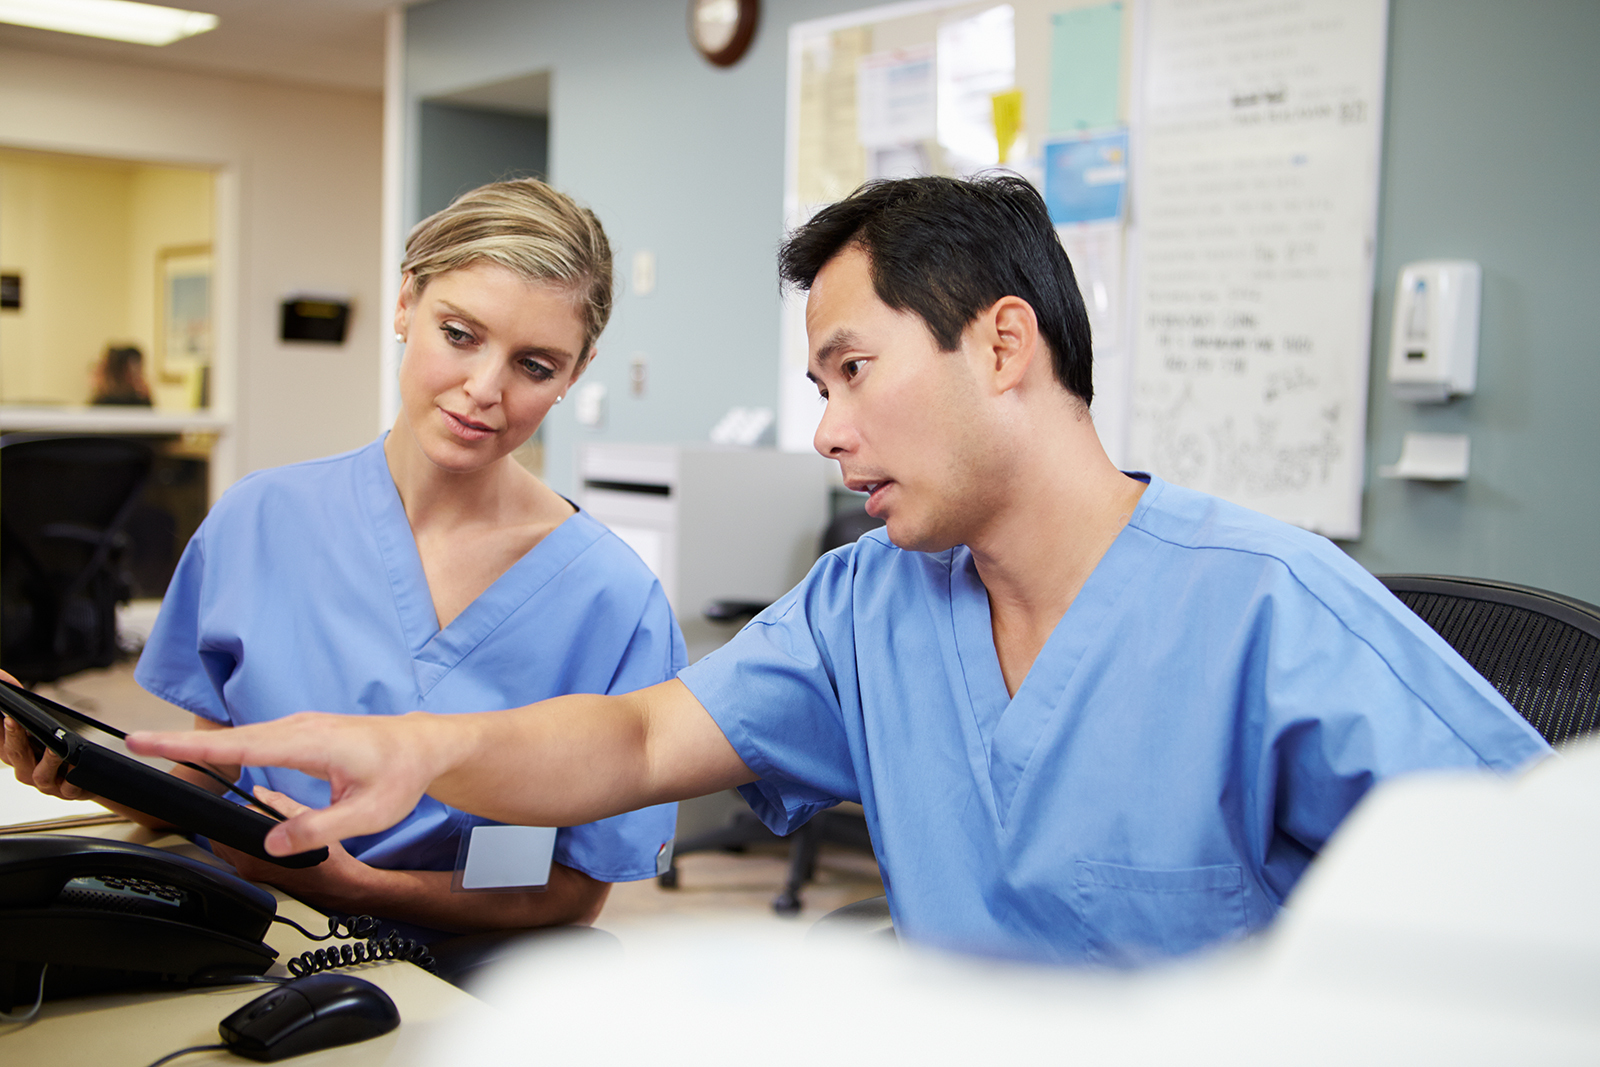 Nurses communicating with each other